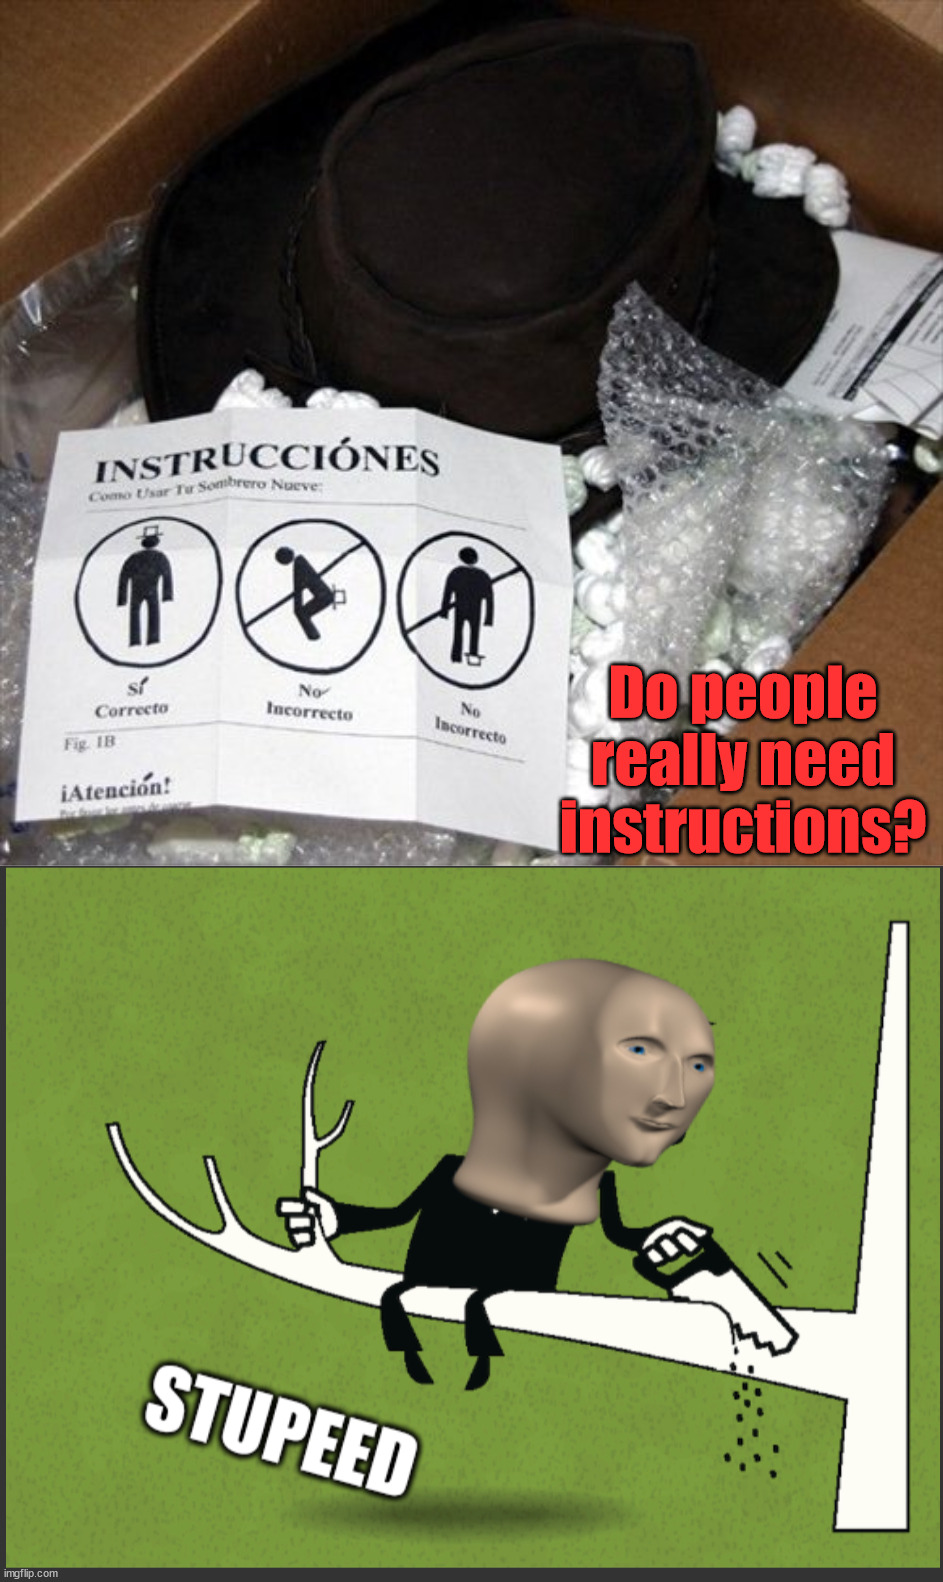 How dumb do people have to be? |  Do people really need instructions? | image tagged in meme man stupeed,hats | made w/ Imgflip meme maker